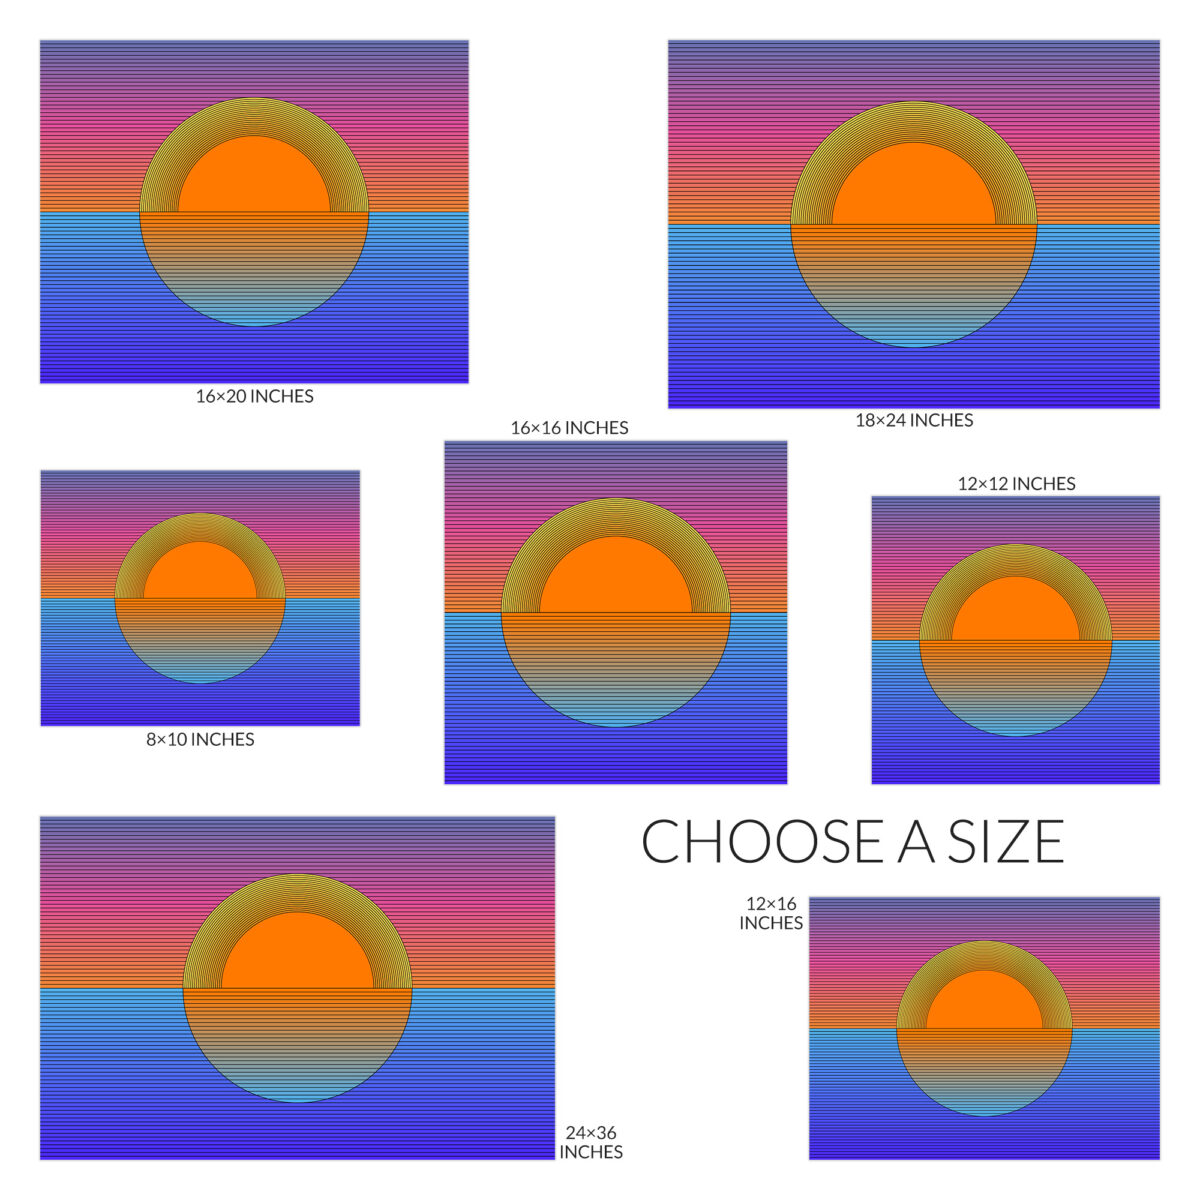 Sunset design, choose a size. Available sizes are 8 inch by 10 inch, 12 inch square, 12 inch by 16 inch, 16 inch square, 16 inch by 20 inch, 18 inch by 24 inch, and 24 inch by 36 inch.